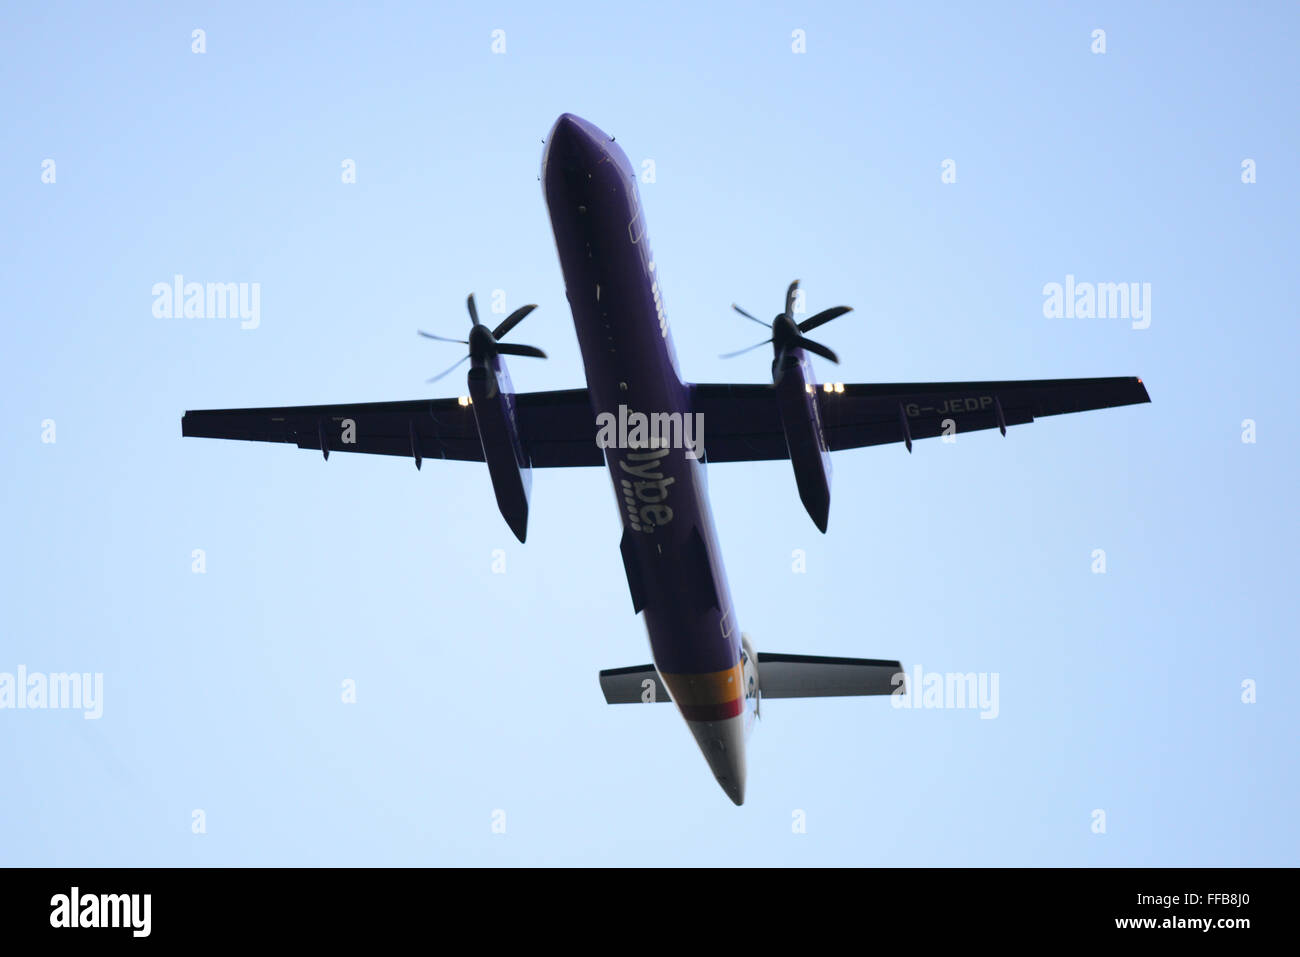 A Flybe aeroplane taking off from Leeds Bradford Airport. Stock Photo